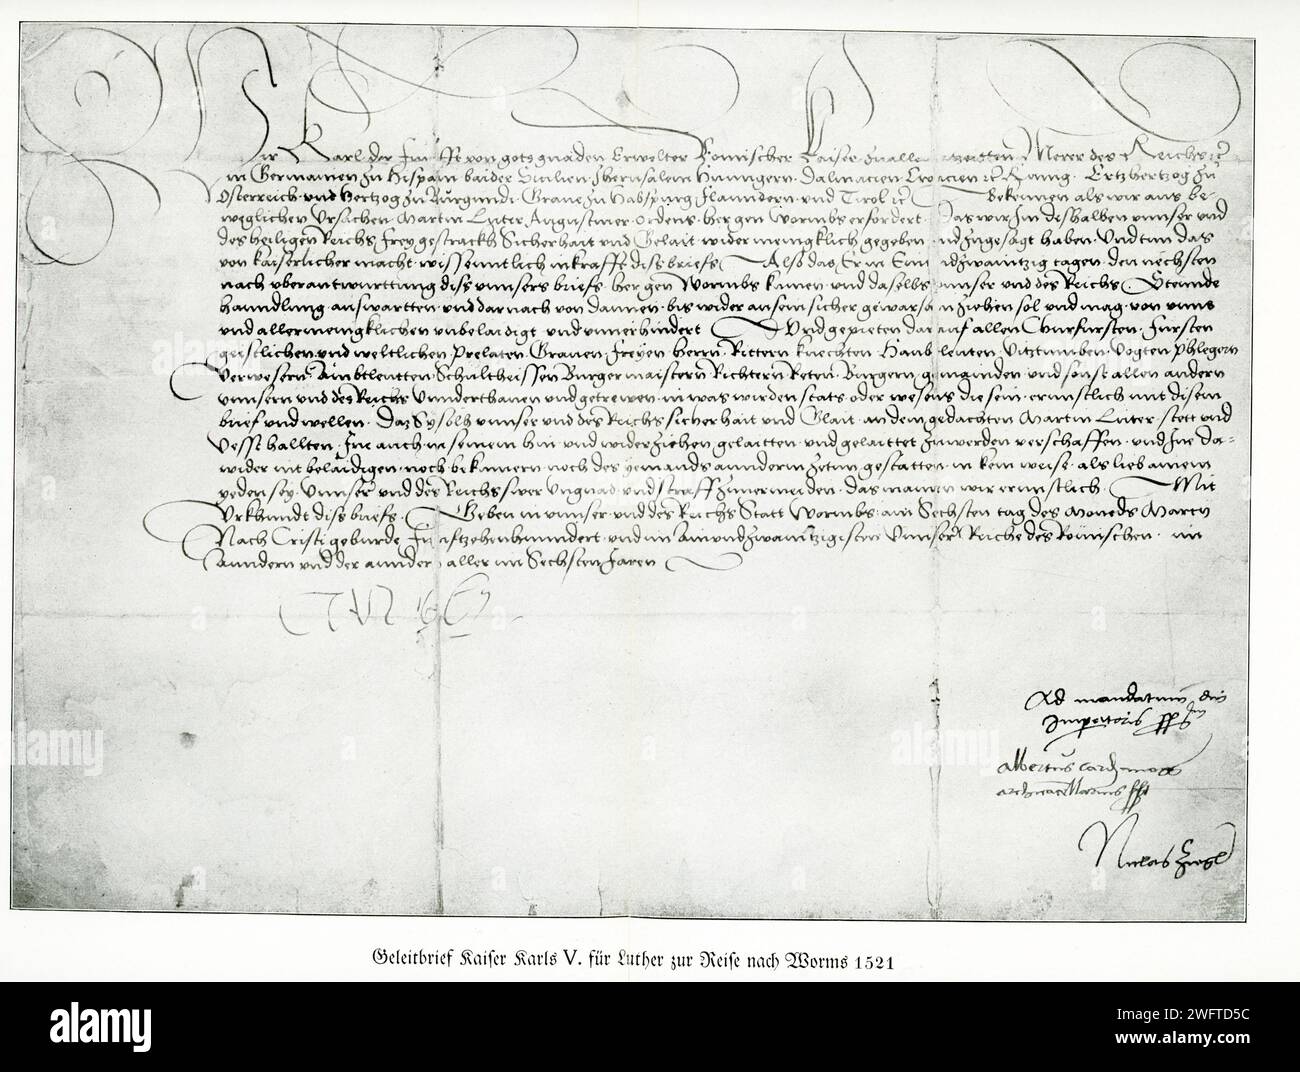 Pictured here is the safe conduct letter from Kaiser Charles I for Martin Luther for his trip to Worms in 1521., The Diet of Worms of 1521, headed by Emperor Charles V, passed the Edict of Worms, which banned Luther's writings and declared him a heretic and an enemy of the state. Although the Edict mandated that Luther should be captured and turned over to the emperor, it was never enforced. Stock Photo